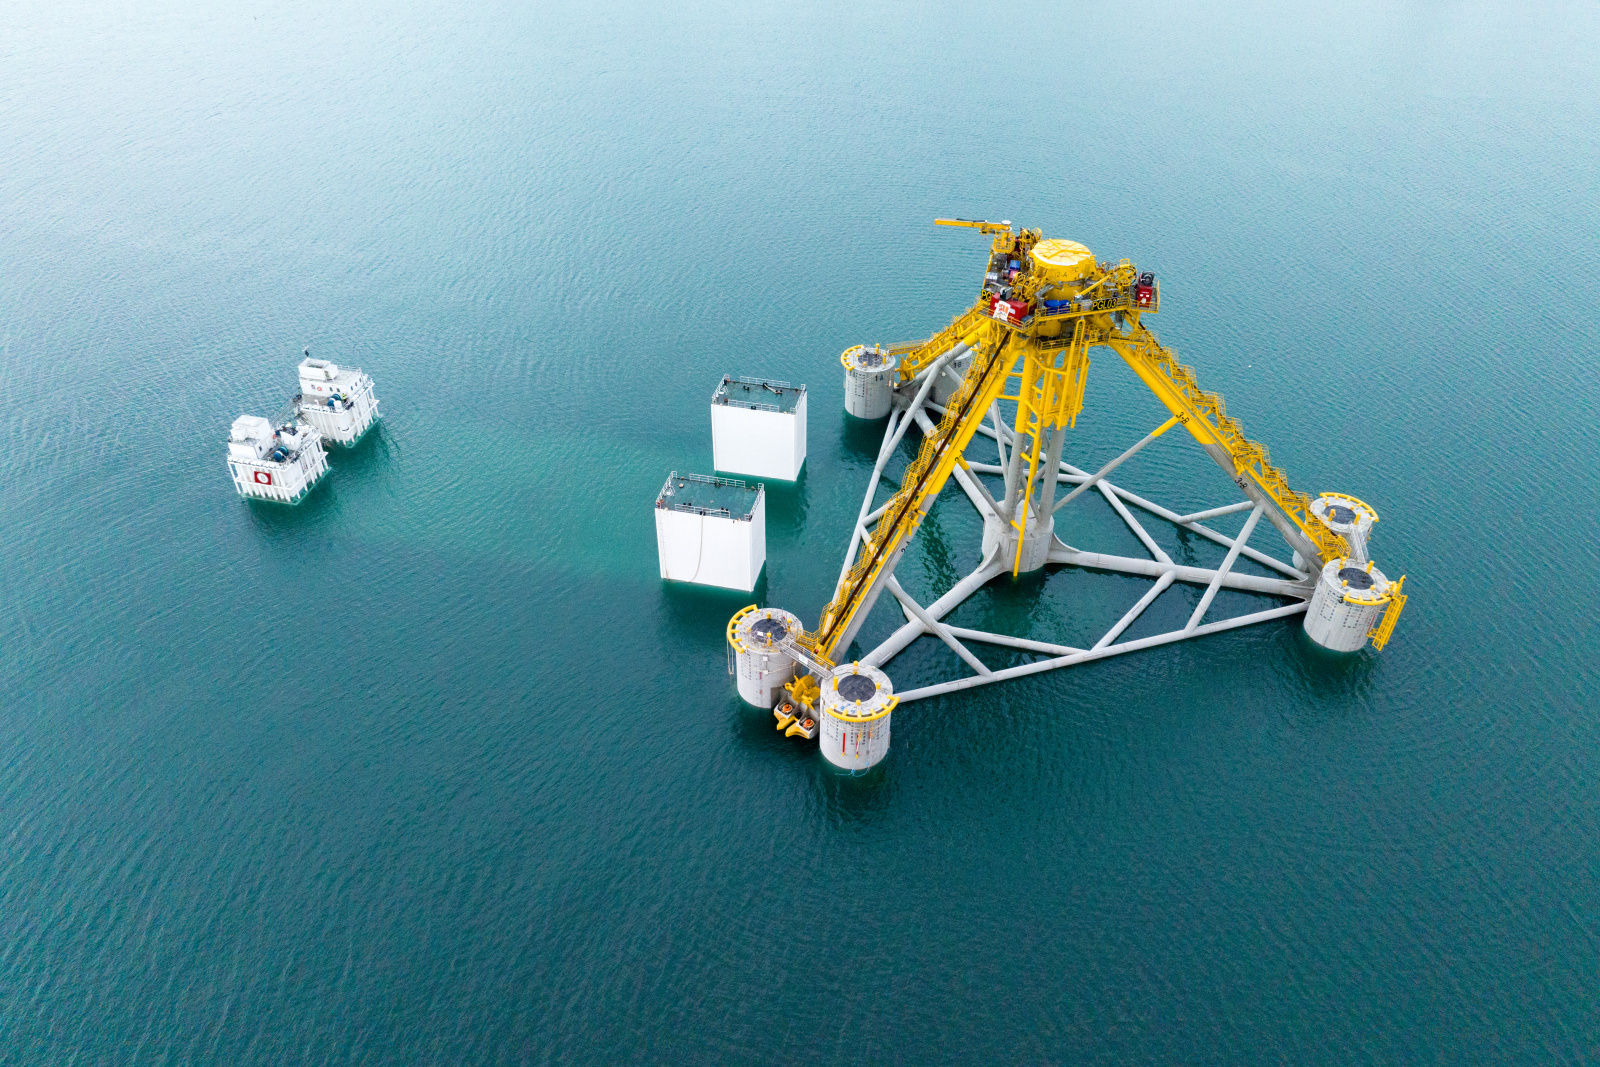 France floating wind: drone shot of Provence Grand Large (PGL) being constructed offshore